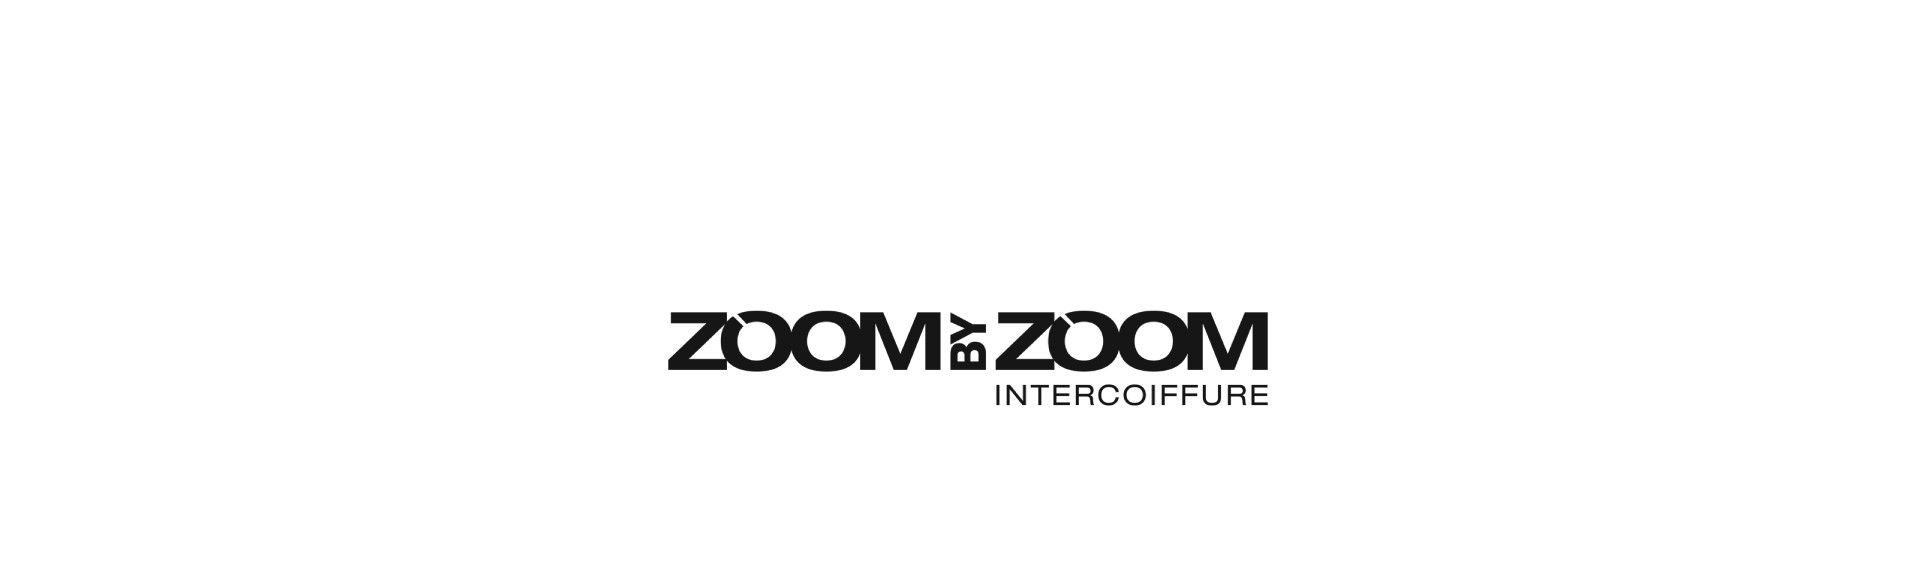 Teleboxen_reference_Zoom_by_Zoom_3.jpg